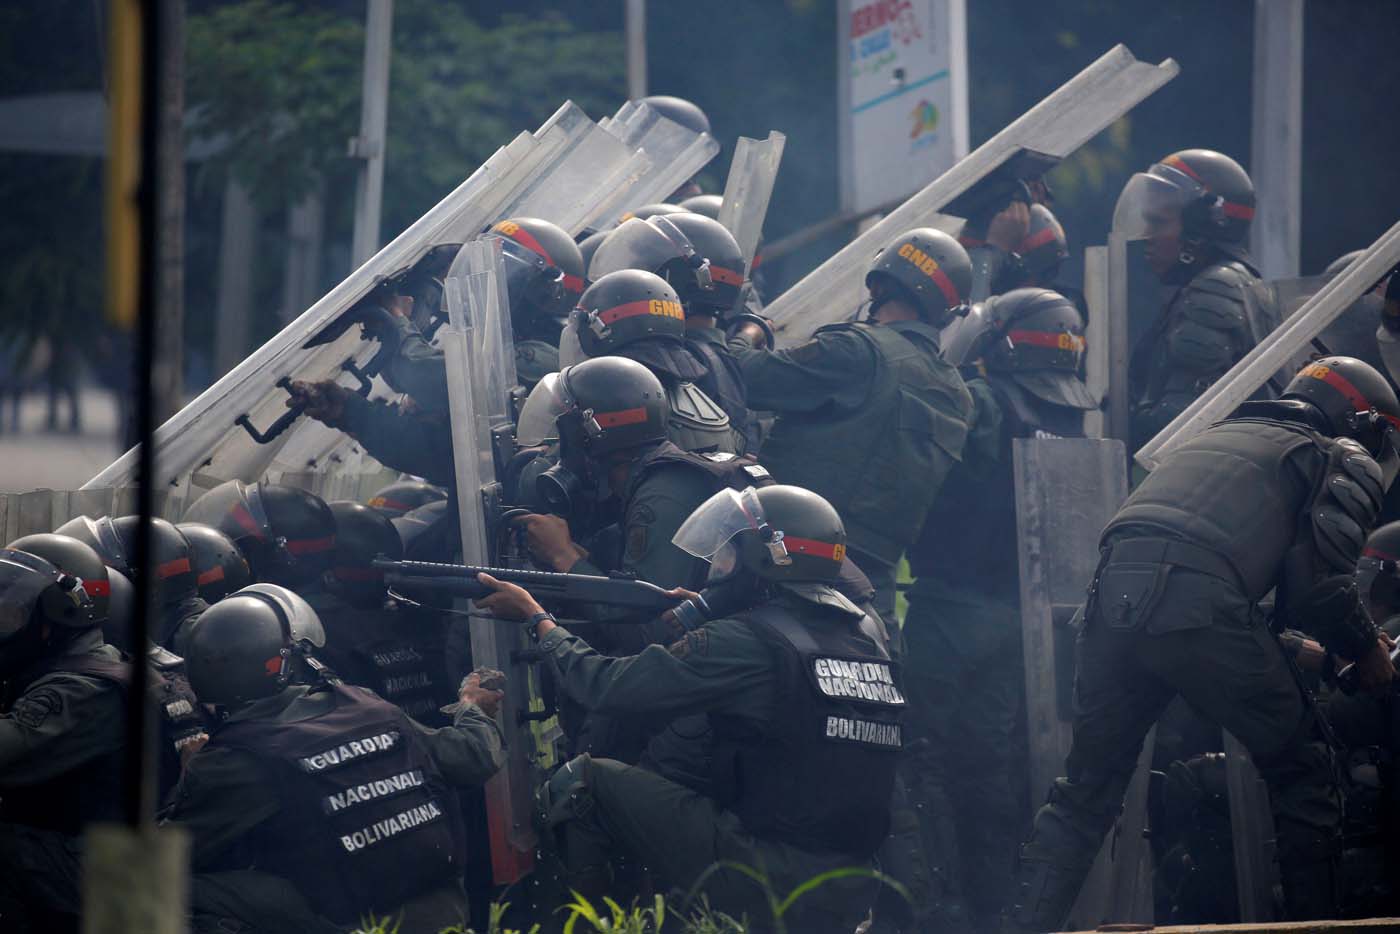 Riot security forces take position while clashing with demonstrators rallying against President Nicolas Maduro in Caracas, Venezuela, May 24, 2017. REUTERS/Carlos Barria